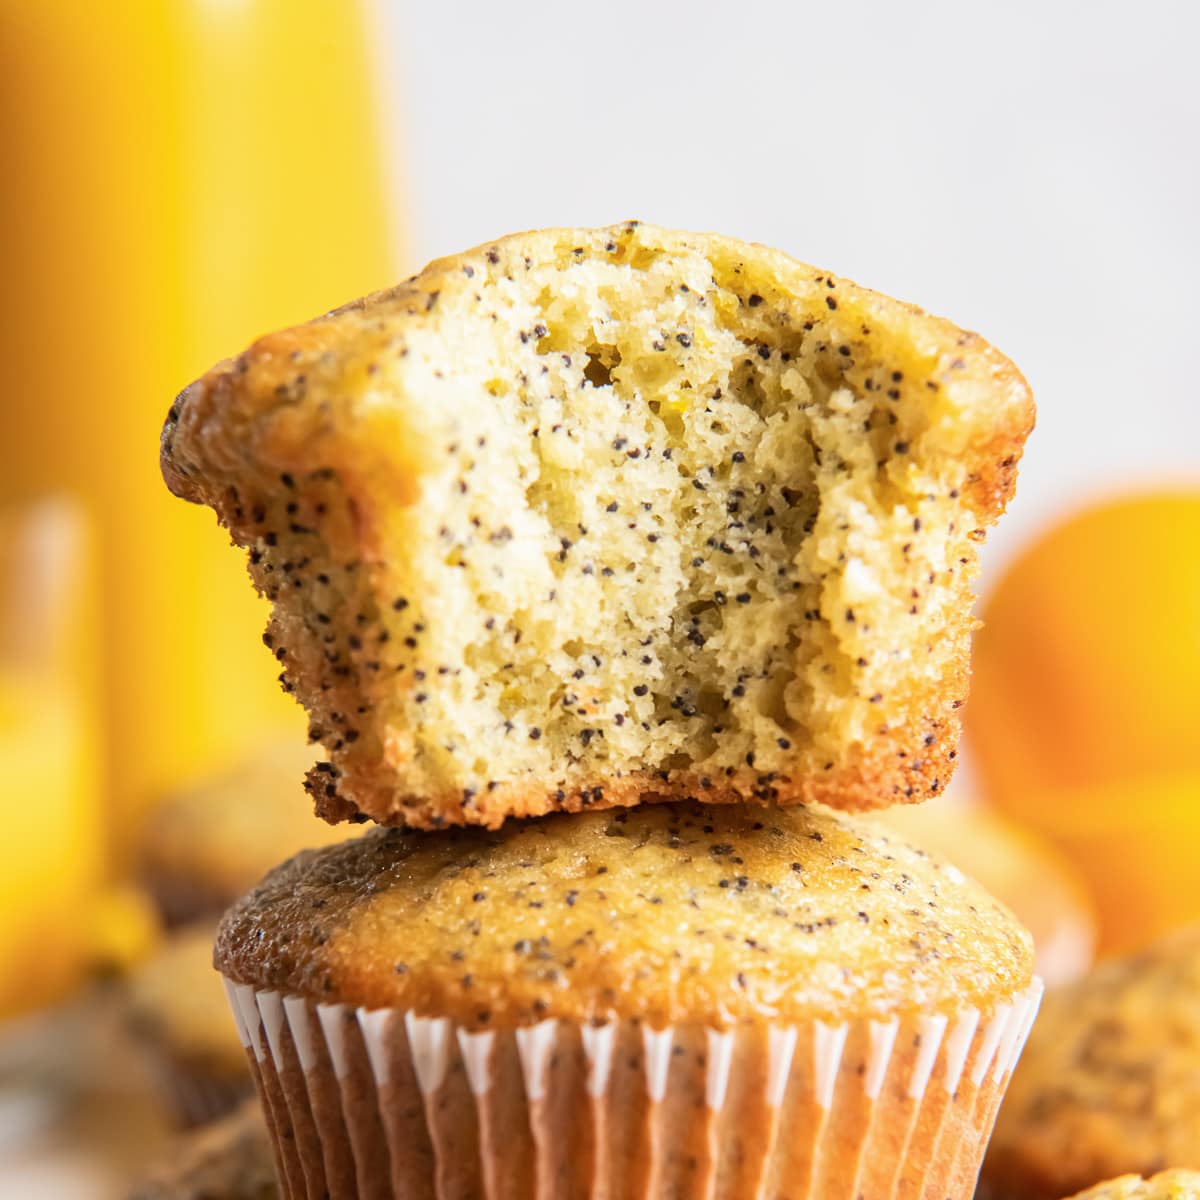 orange poppy seed muffin with a bite on top of another muffin.